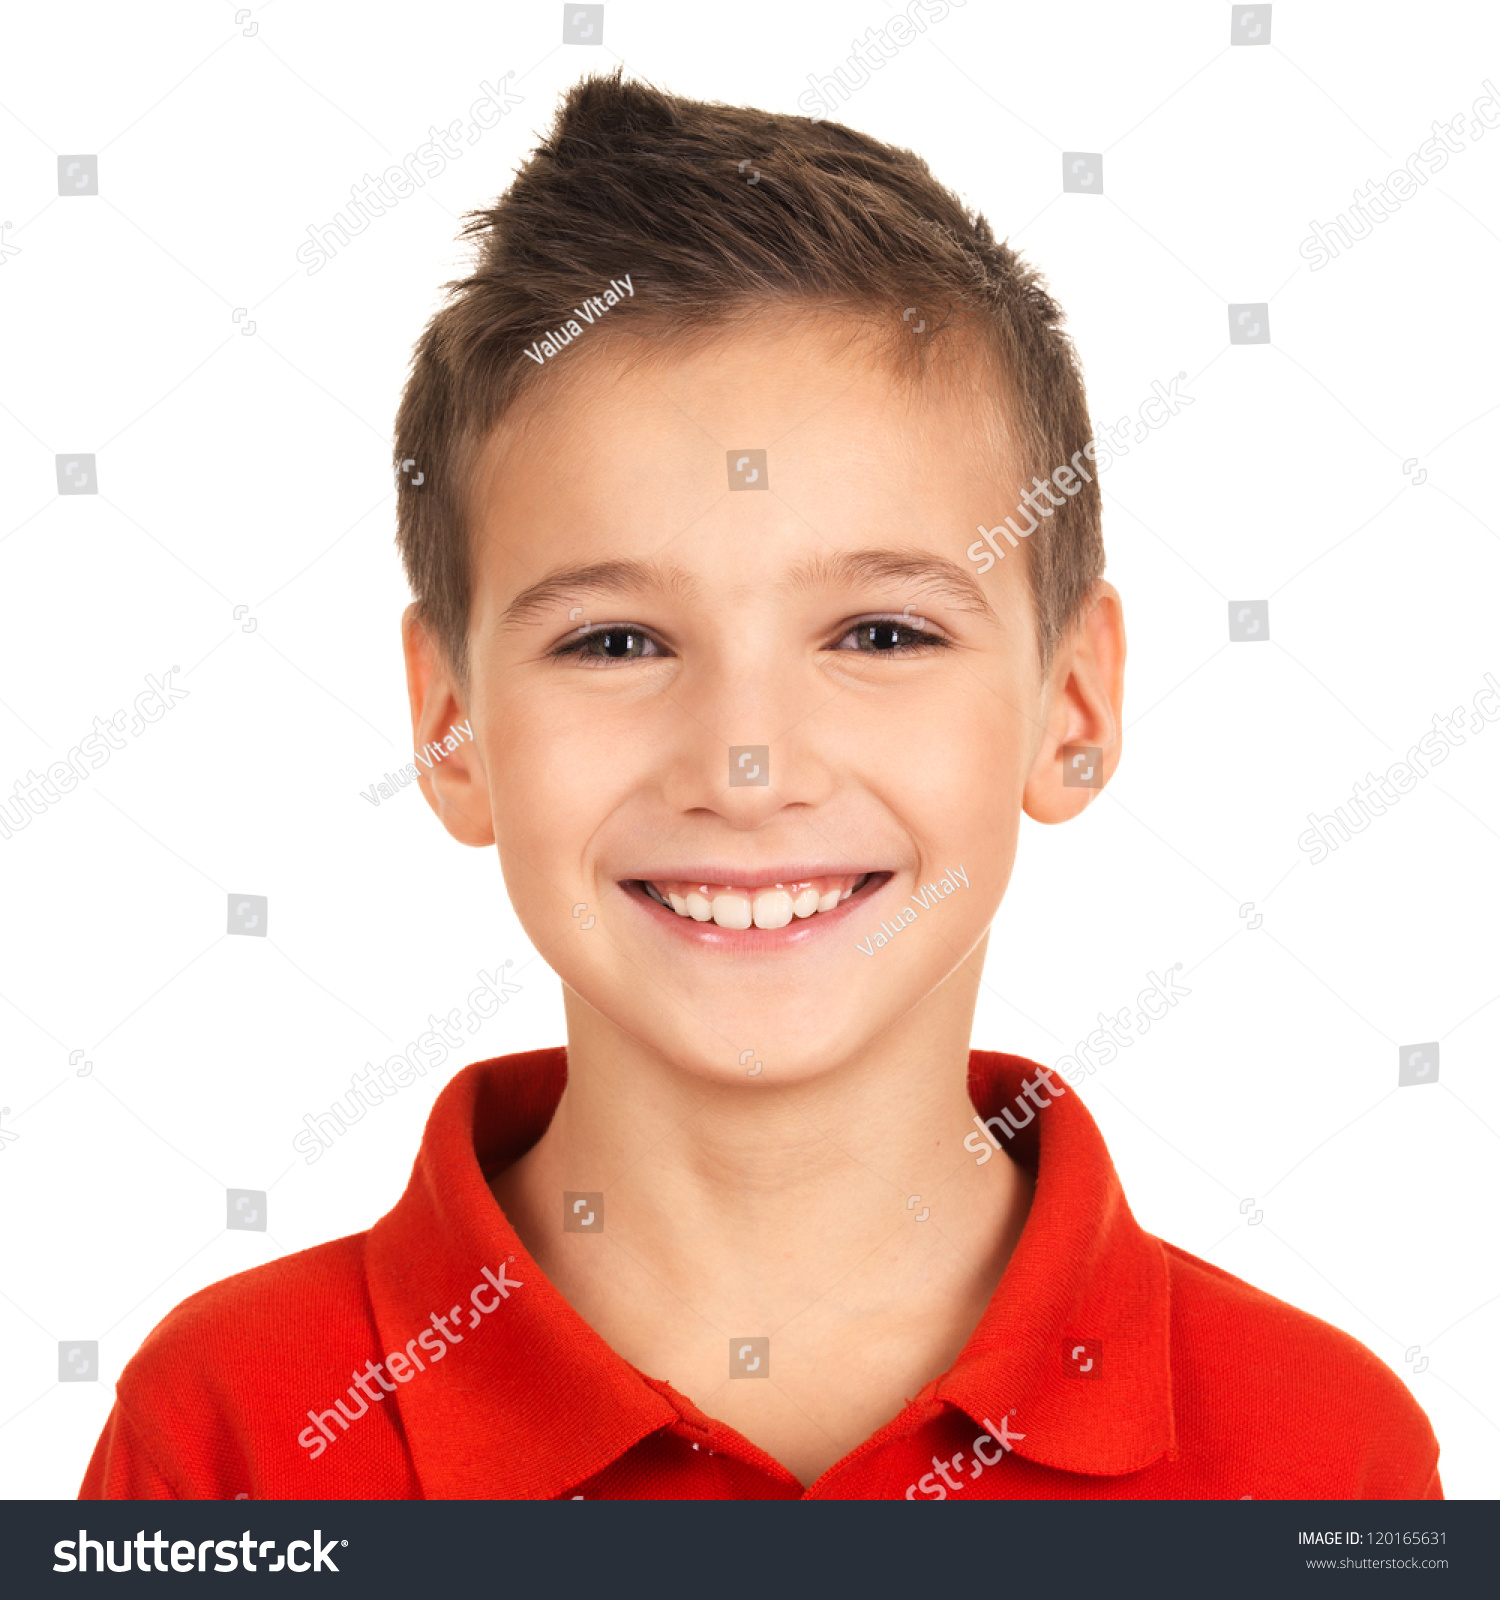 Royalty-free Photo of adorable young happy boy… #120165631 Stock ...